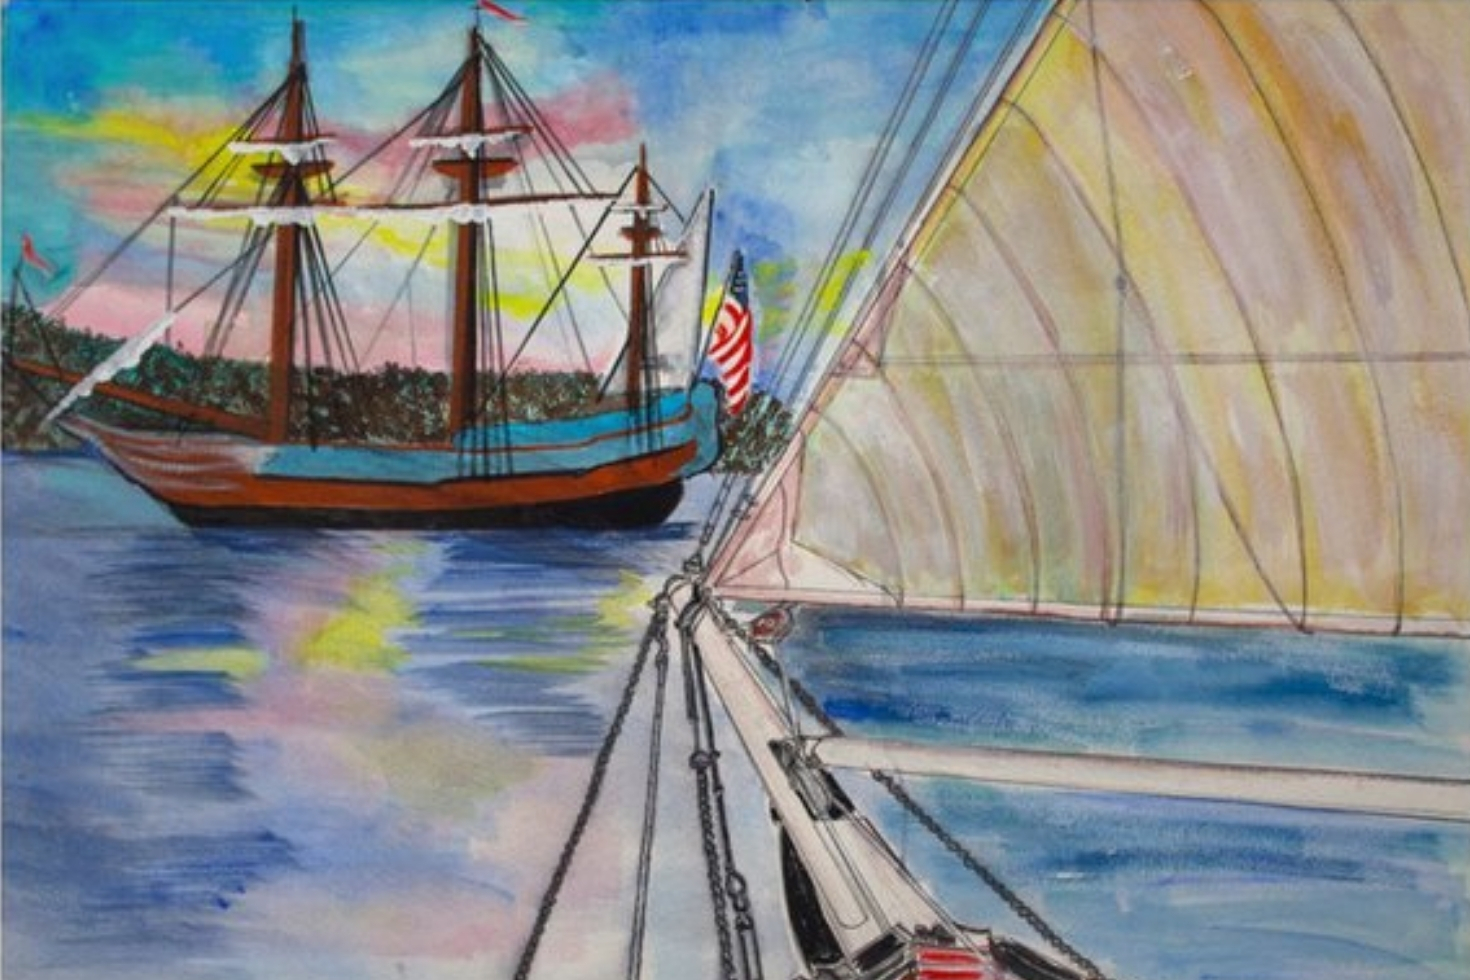 Water color painting of sailboats on the water